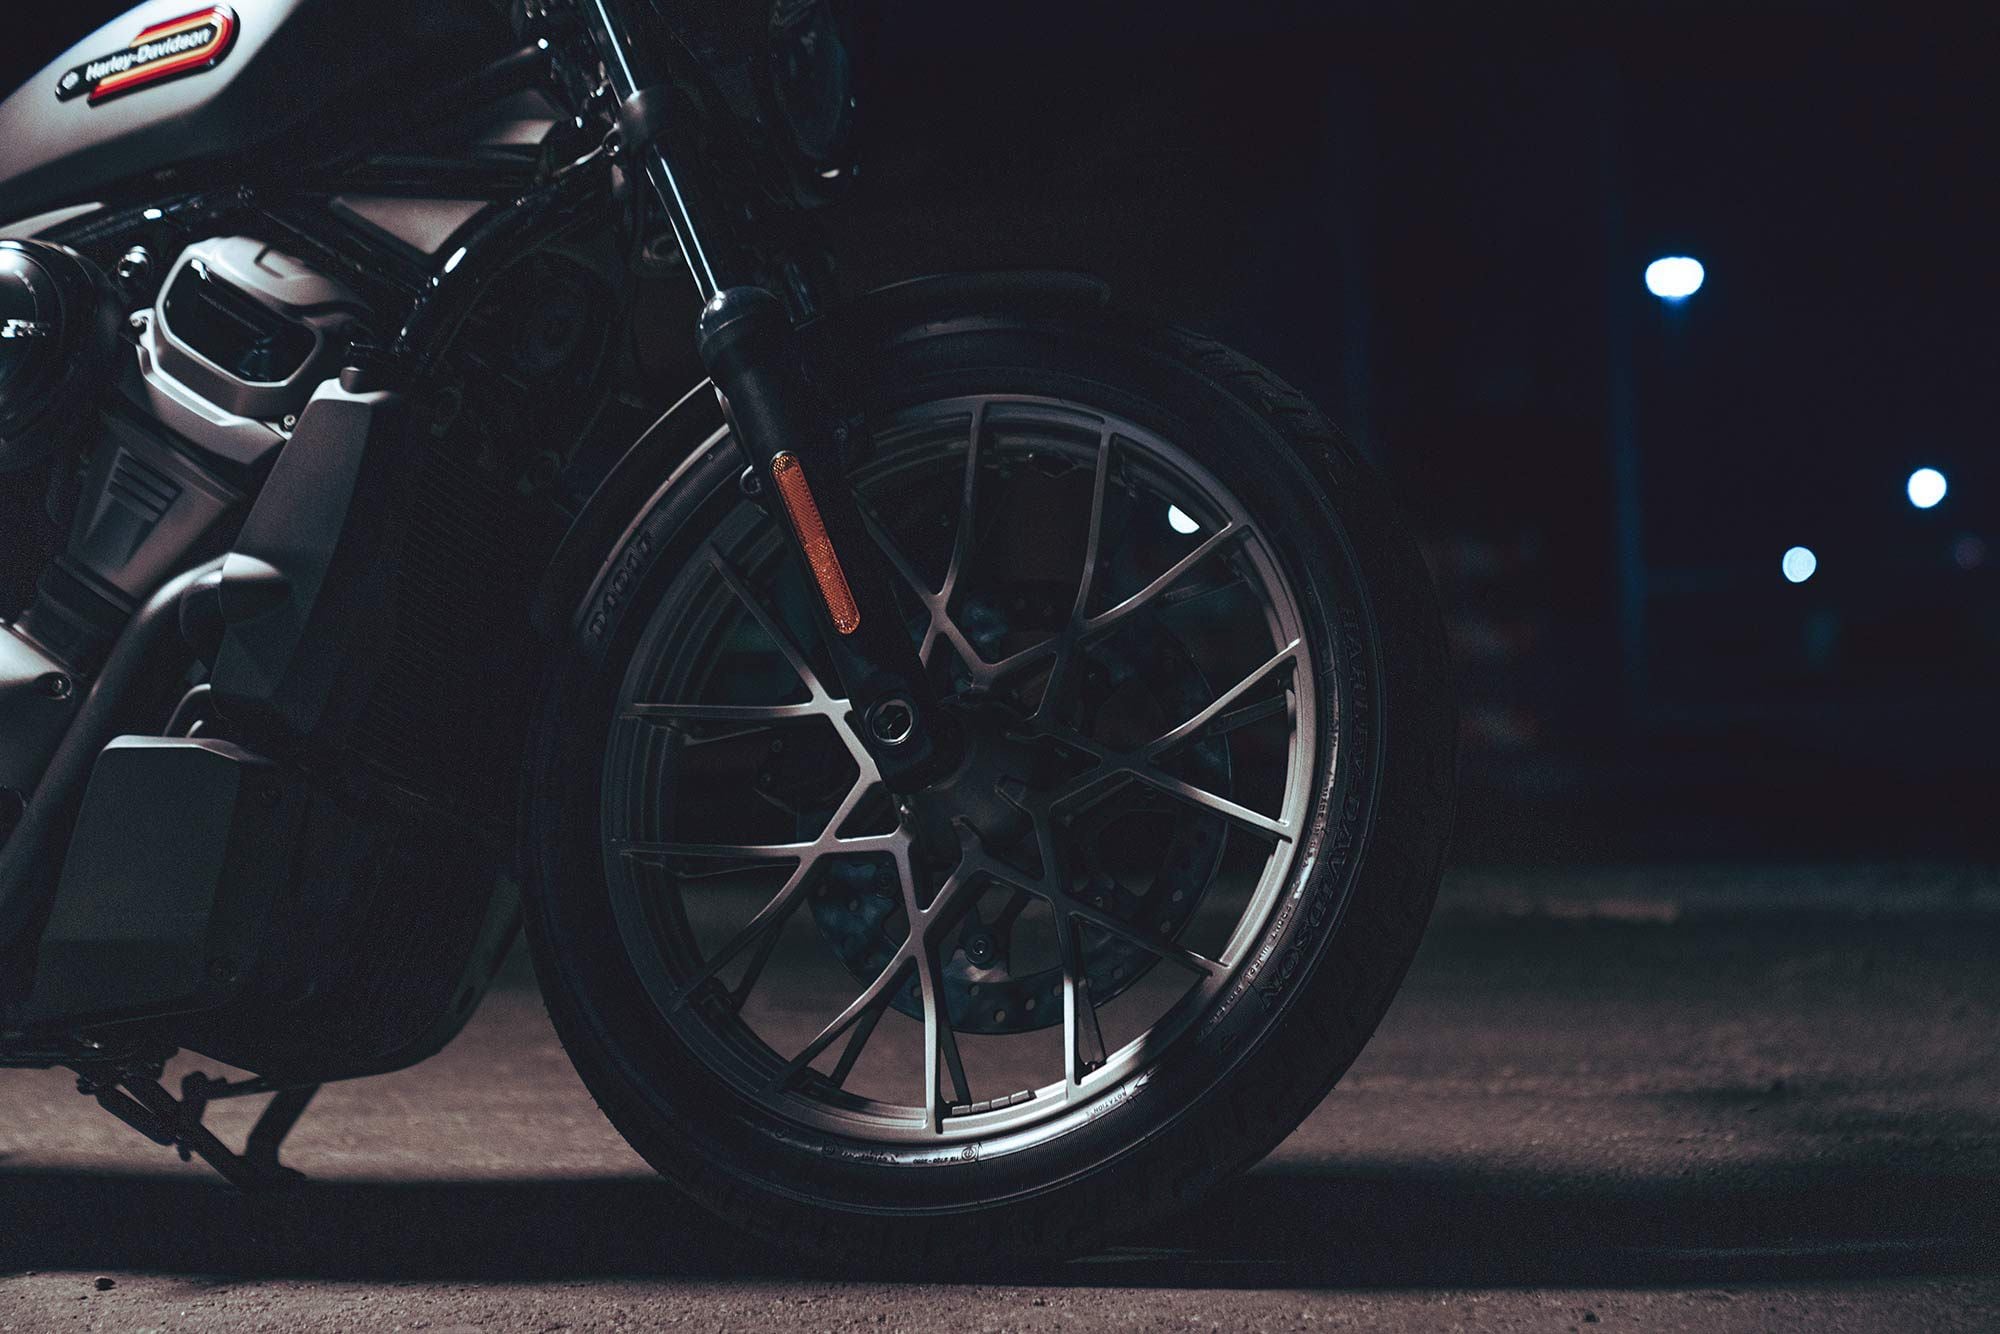 The Nightster Special’s redesigned 14-spoke wheels now feature a Tire Pressure Management System.